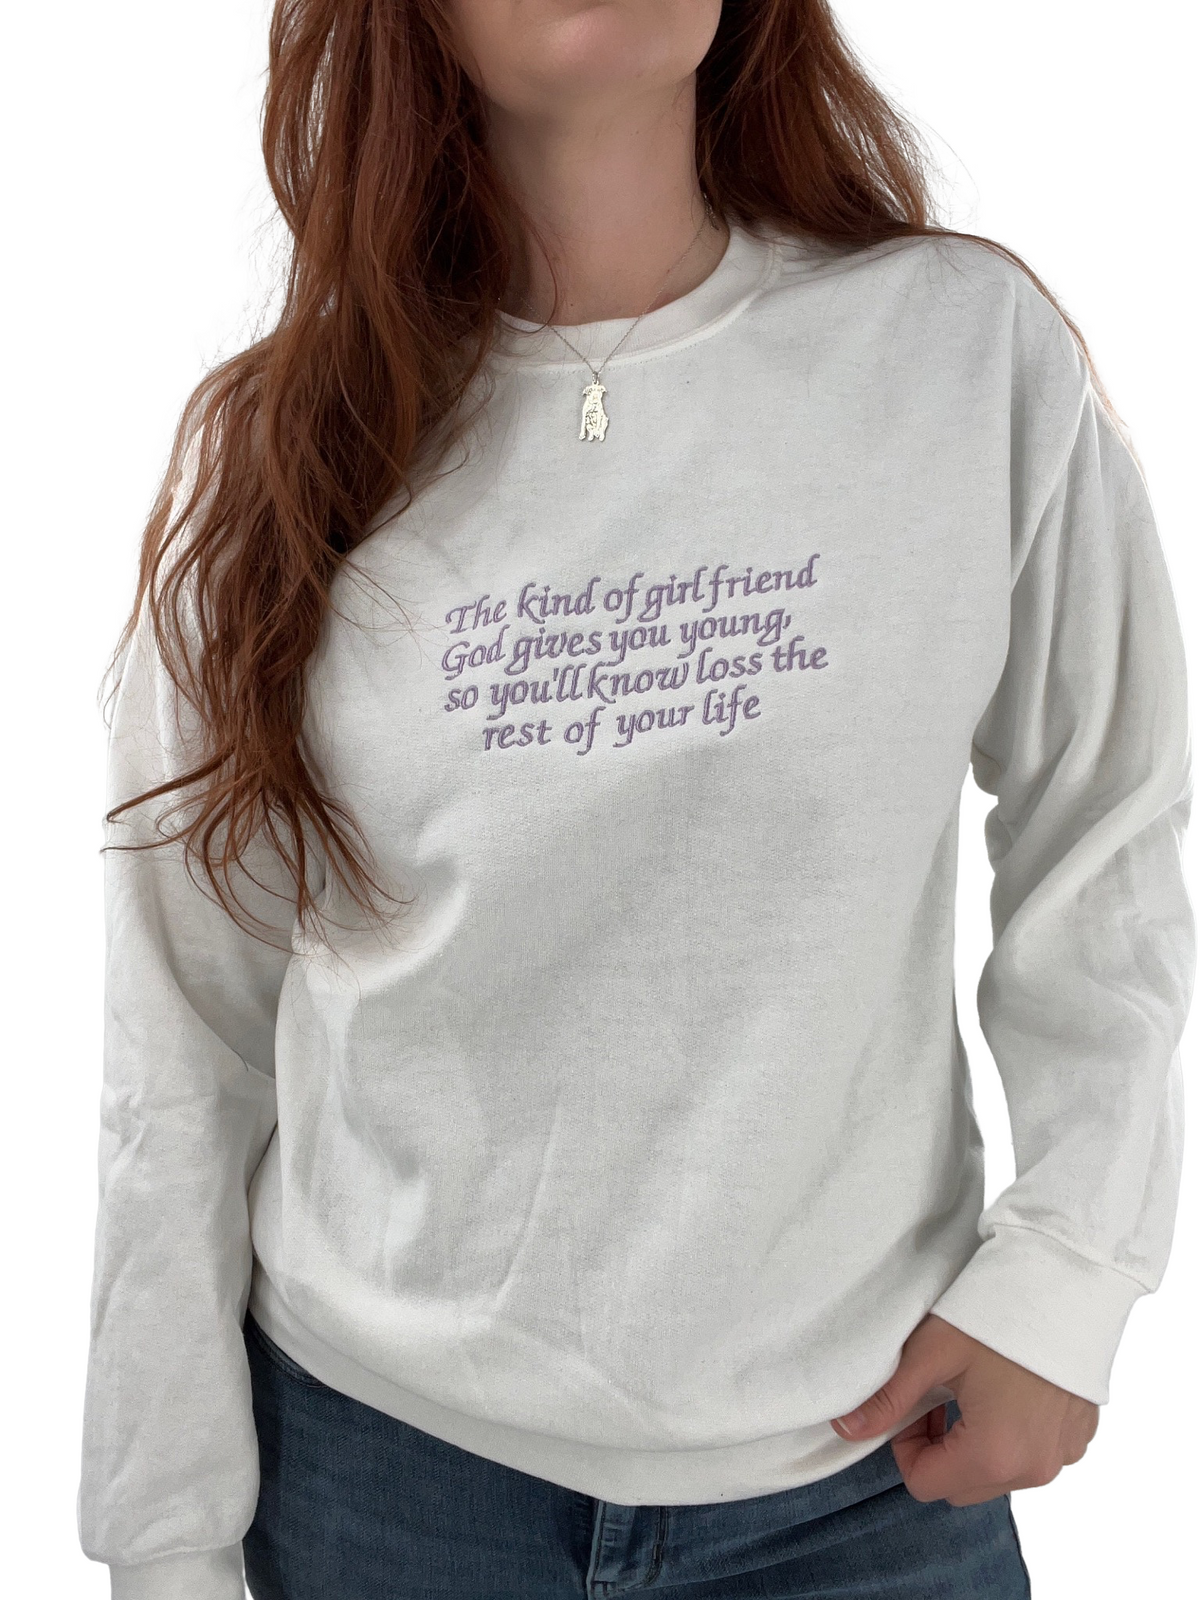 The Kind of Girlfriend God Gives You Young Embroidered Unisex Sweatshirt